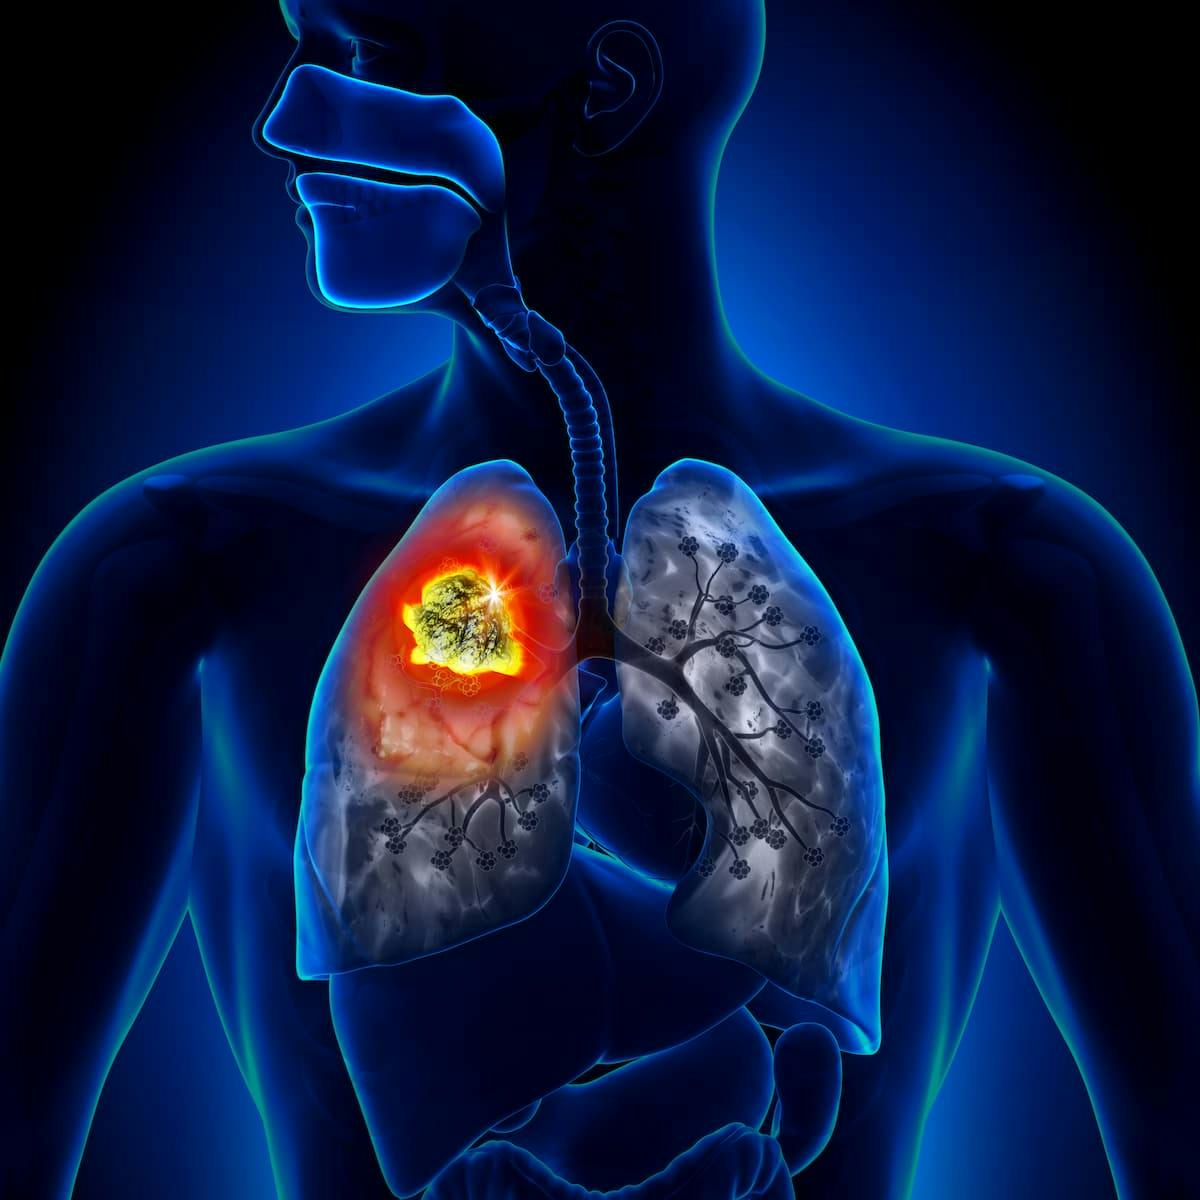 Pembrolizumab plus chemotherapy followed by resection and adjuvant pembrolizumab also appears to improve pathological responses in patients with non–small cell lung cancer.